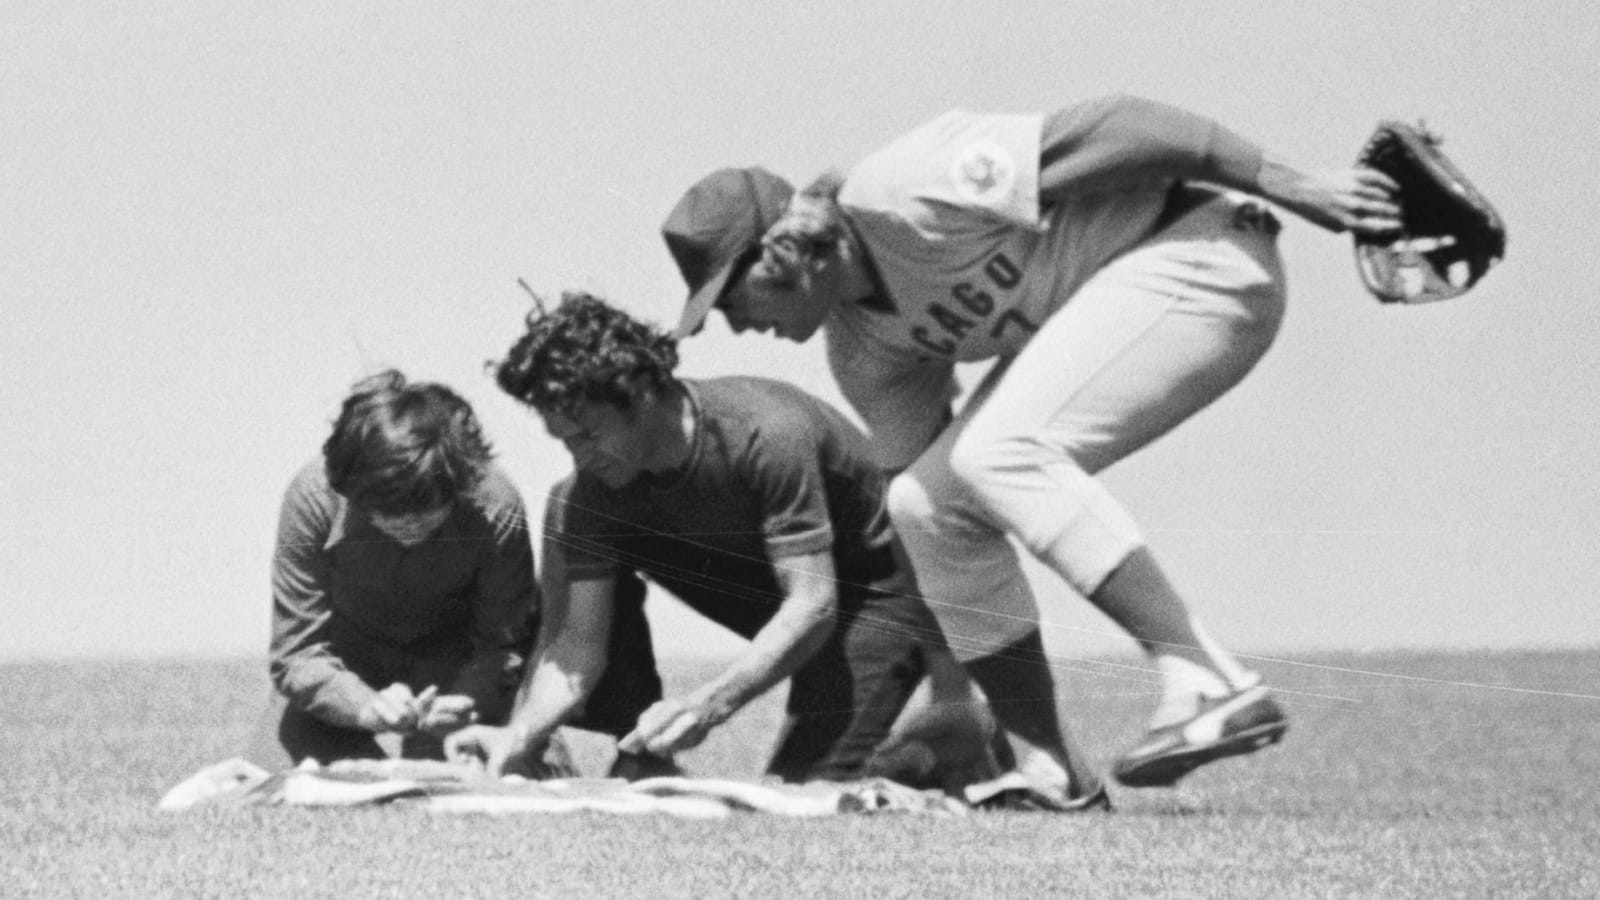 Rick Monday saves American flag from protesters in 1976 